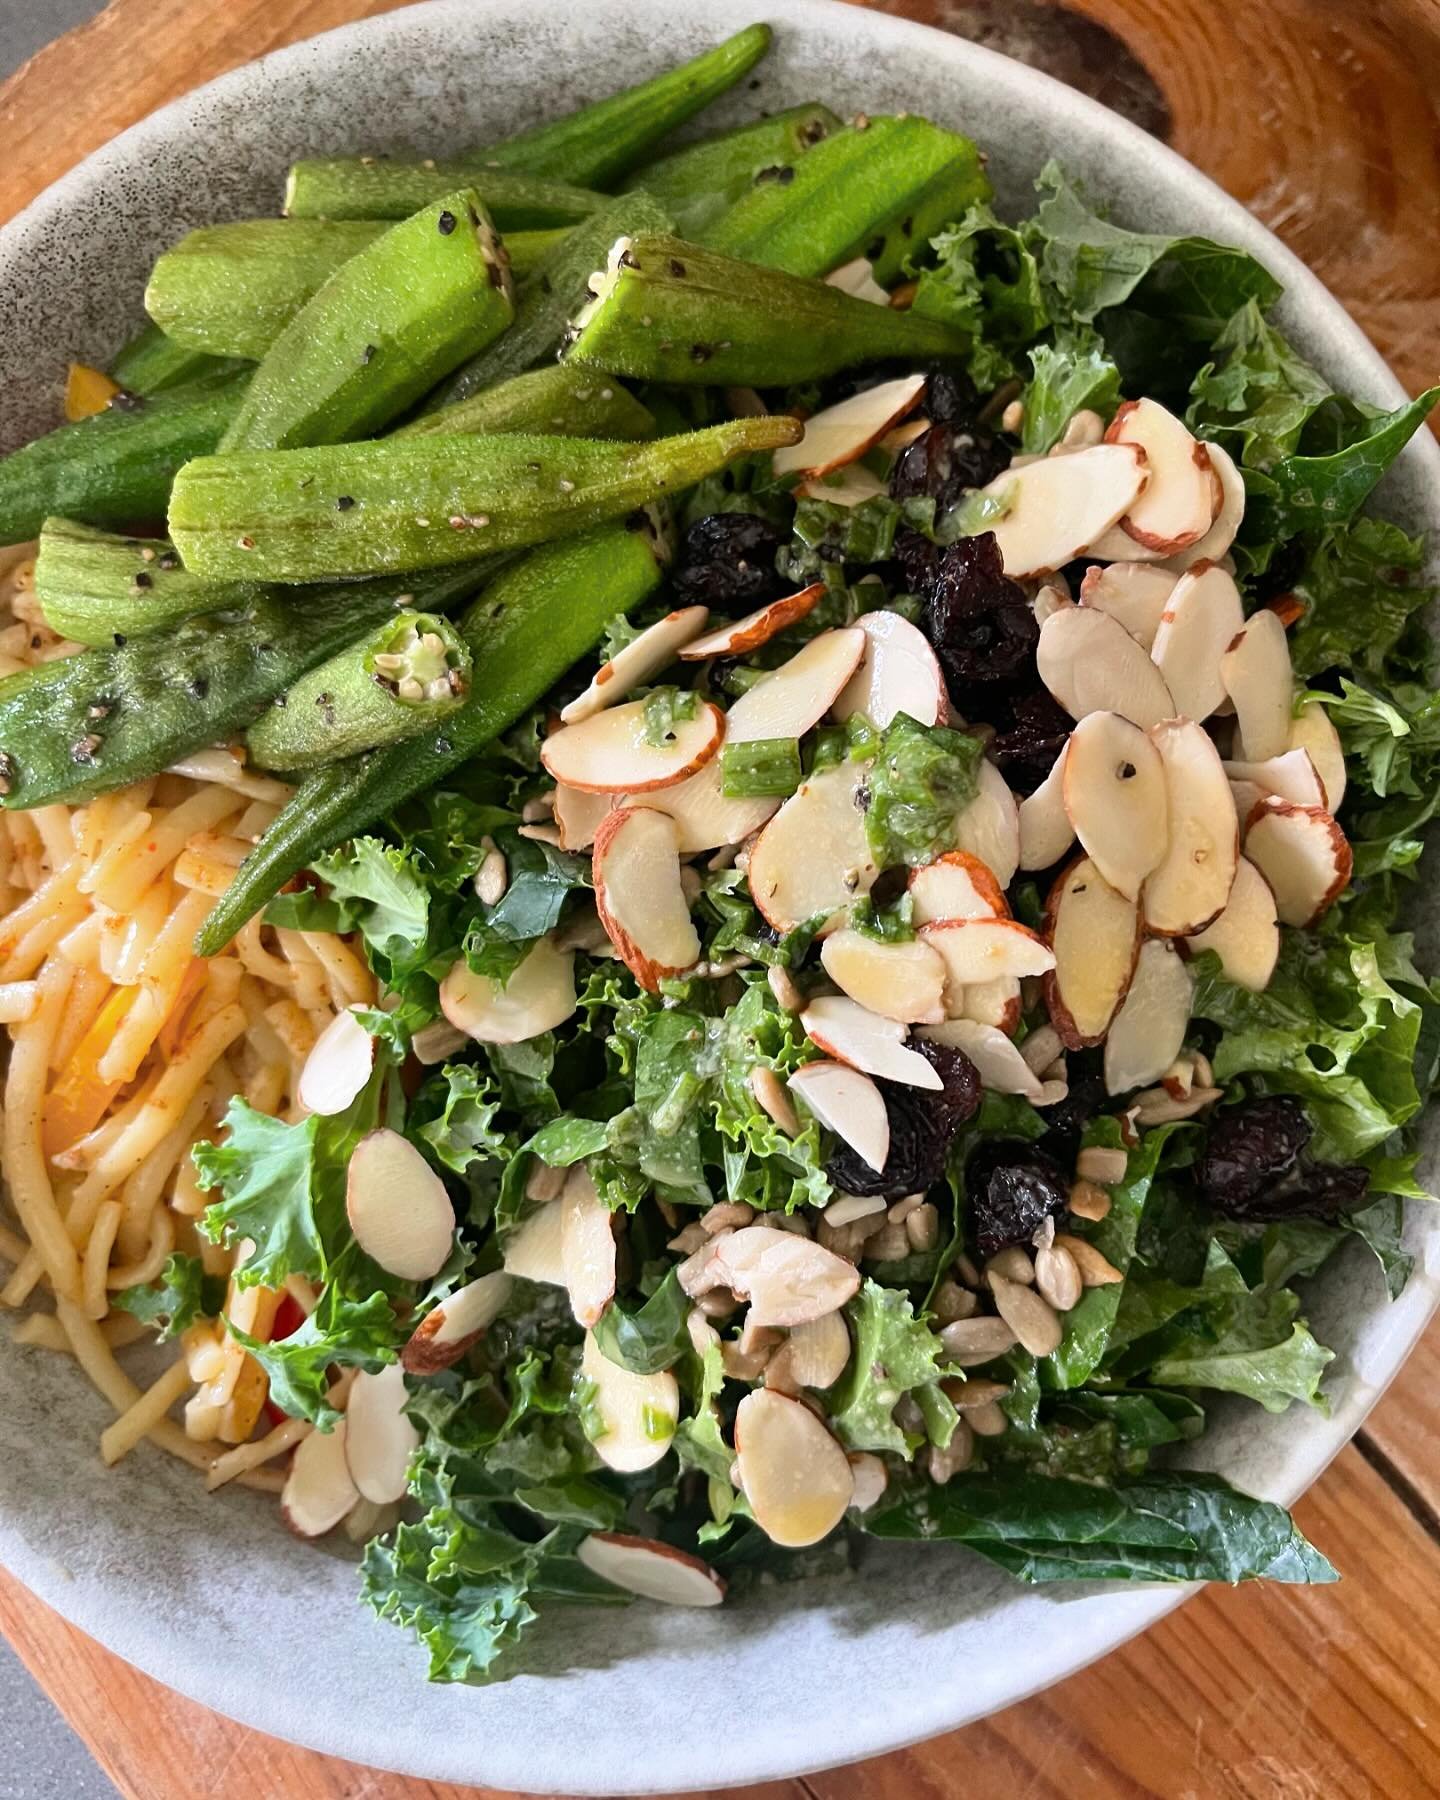 Leftover Cajun Shrimp Pasta recipe @spoonforkbacon 

Seared Okra with Salt and Cracked Pepper. 

My first Kale Salad out of my Garden with Cranberries, Sunflower Seeds and Slice Almonds. 

Julia Childs Vinaigrette Salad Dressing Recipe ~ 

1/2 Tables